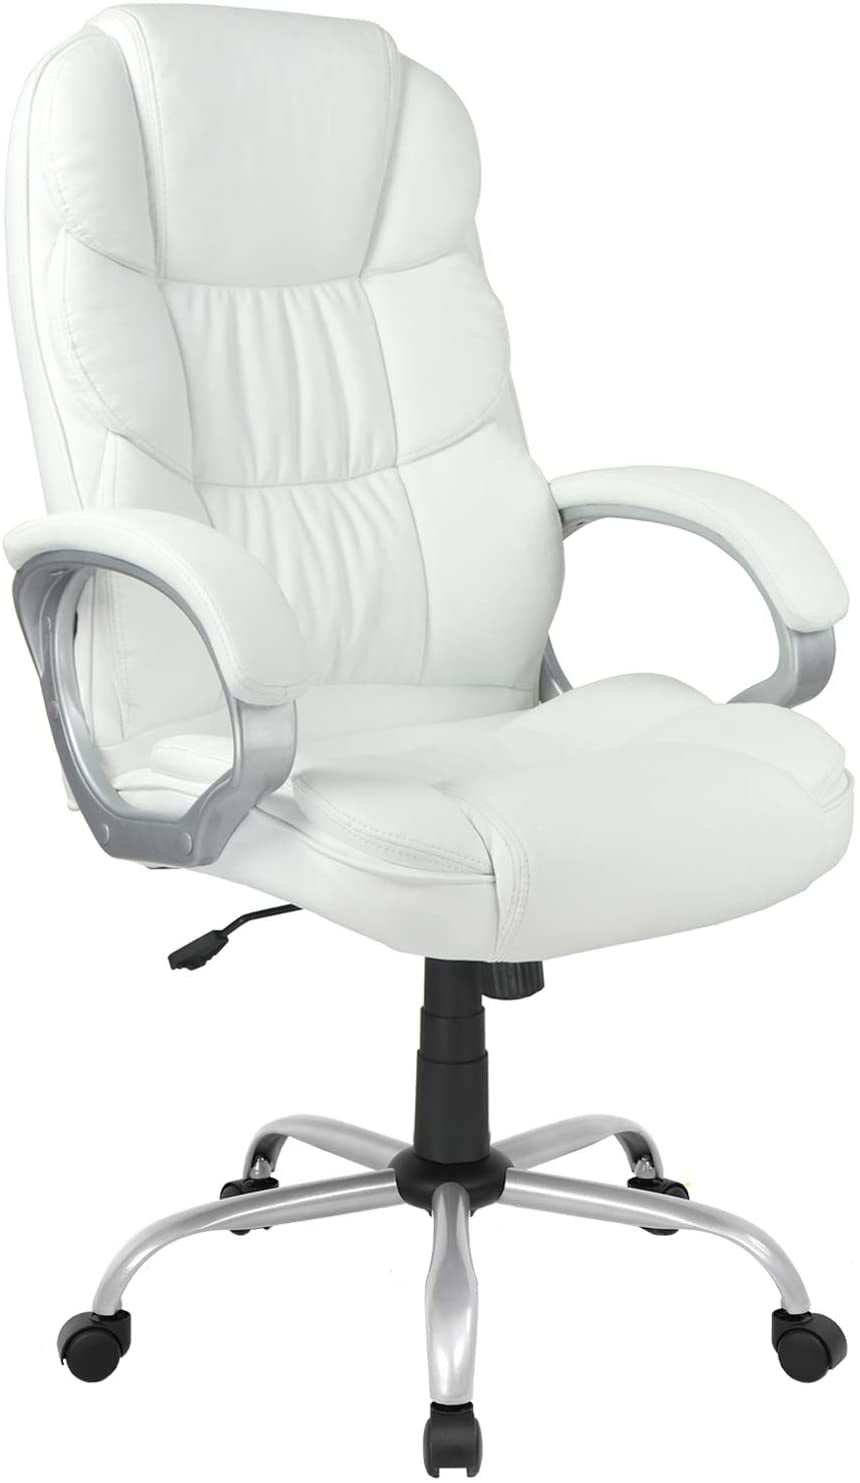 Ergonomic Office Chair Desk Chair Computer Chair with Arms Modern